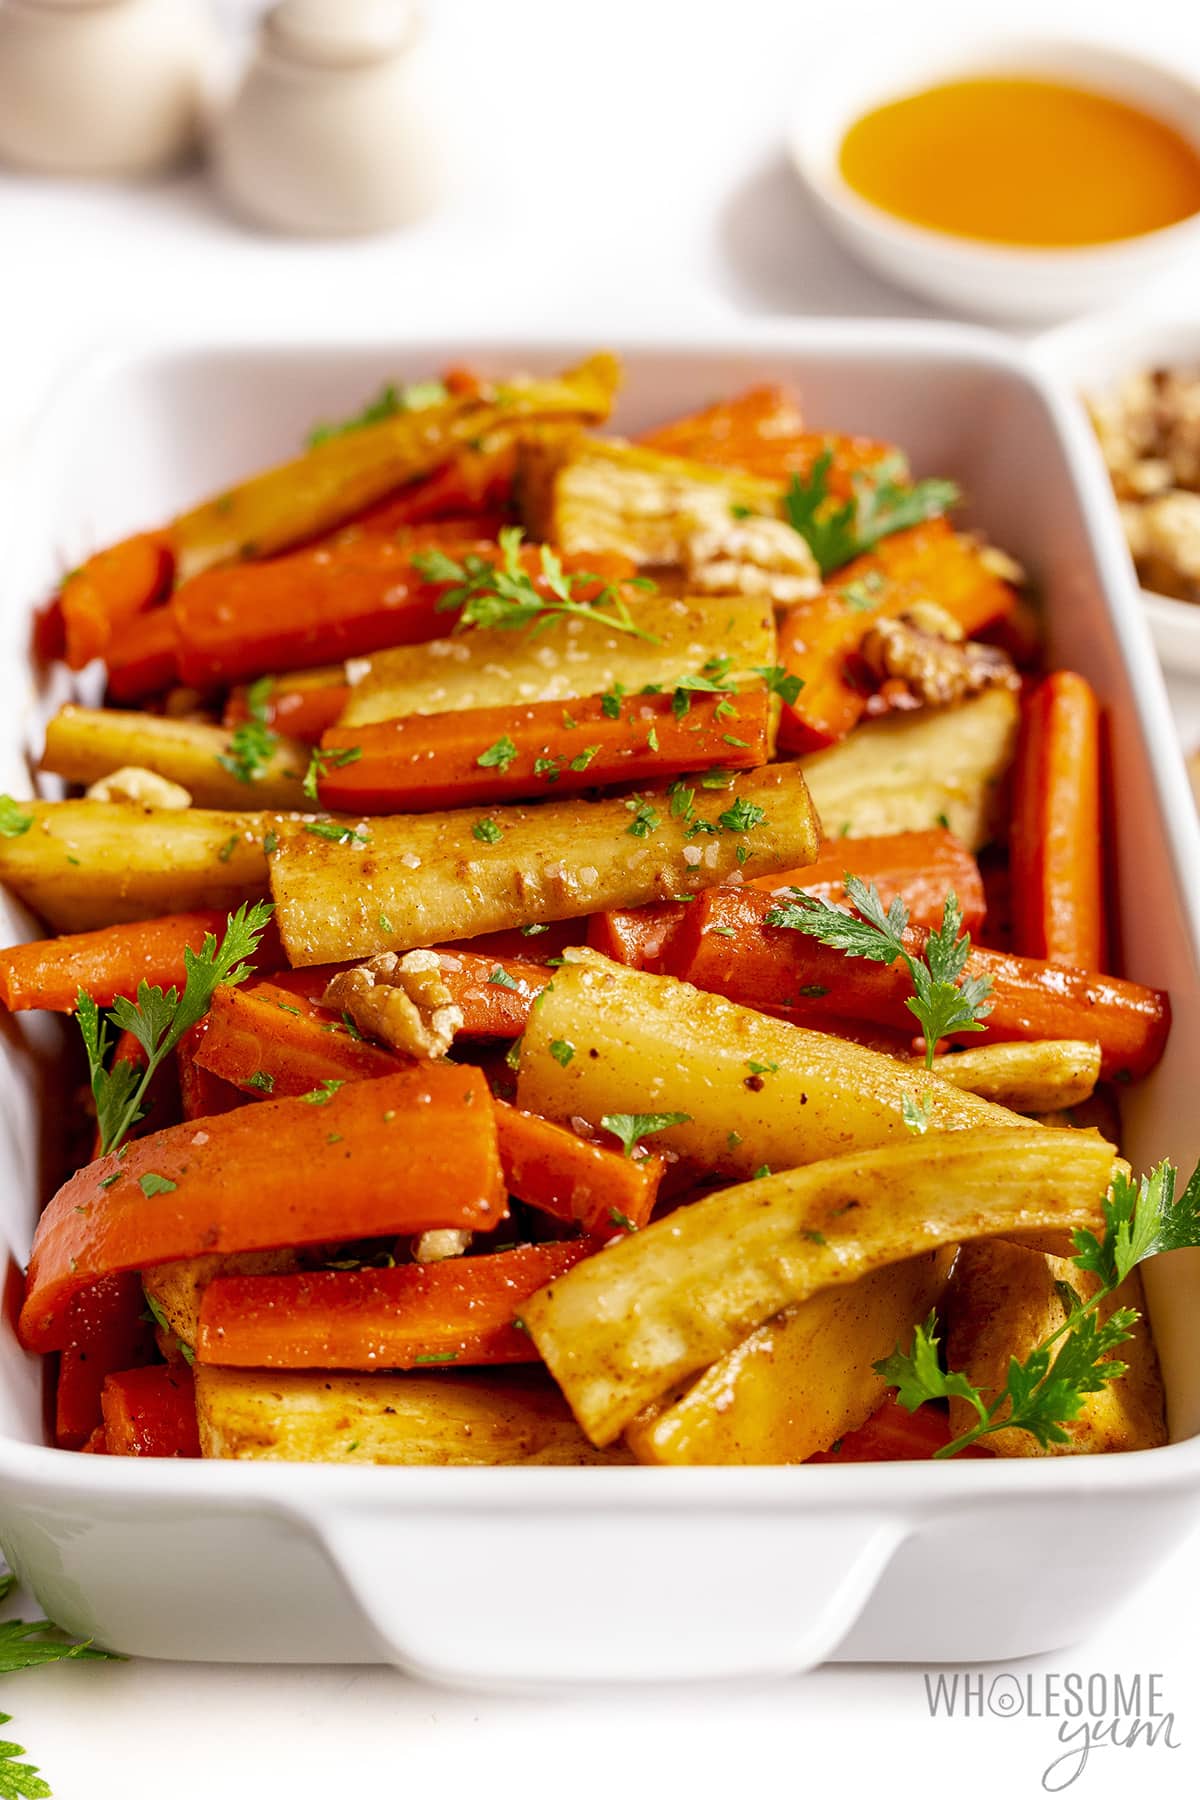 Cooked carrots and parsnips in a serving plater.